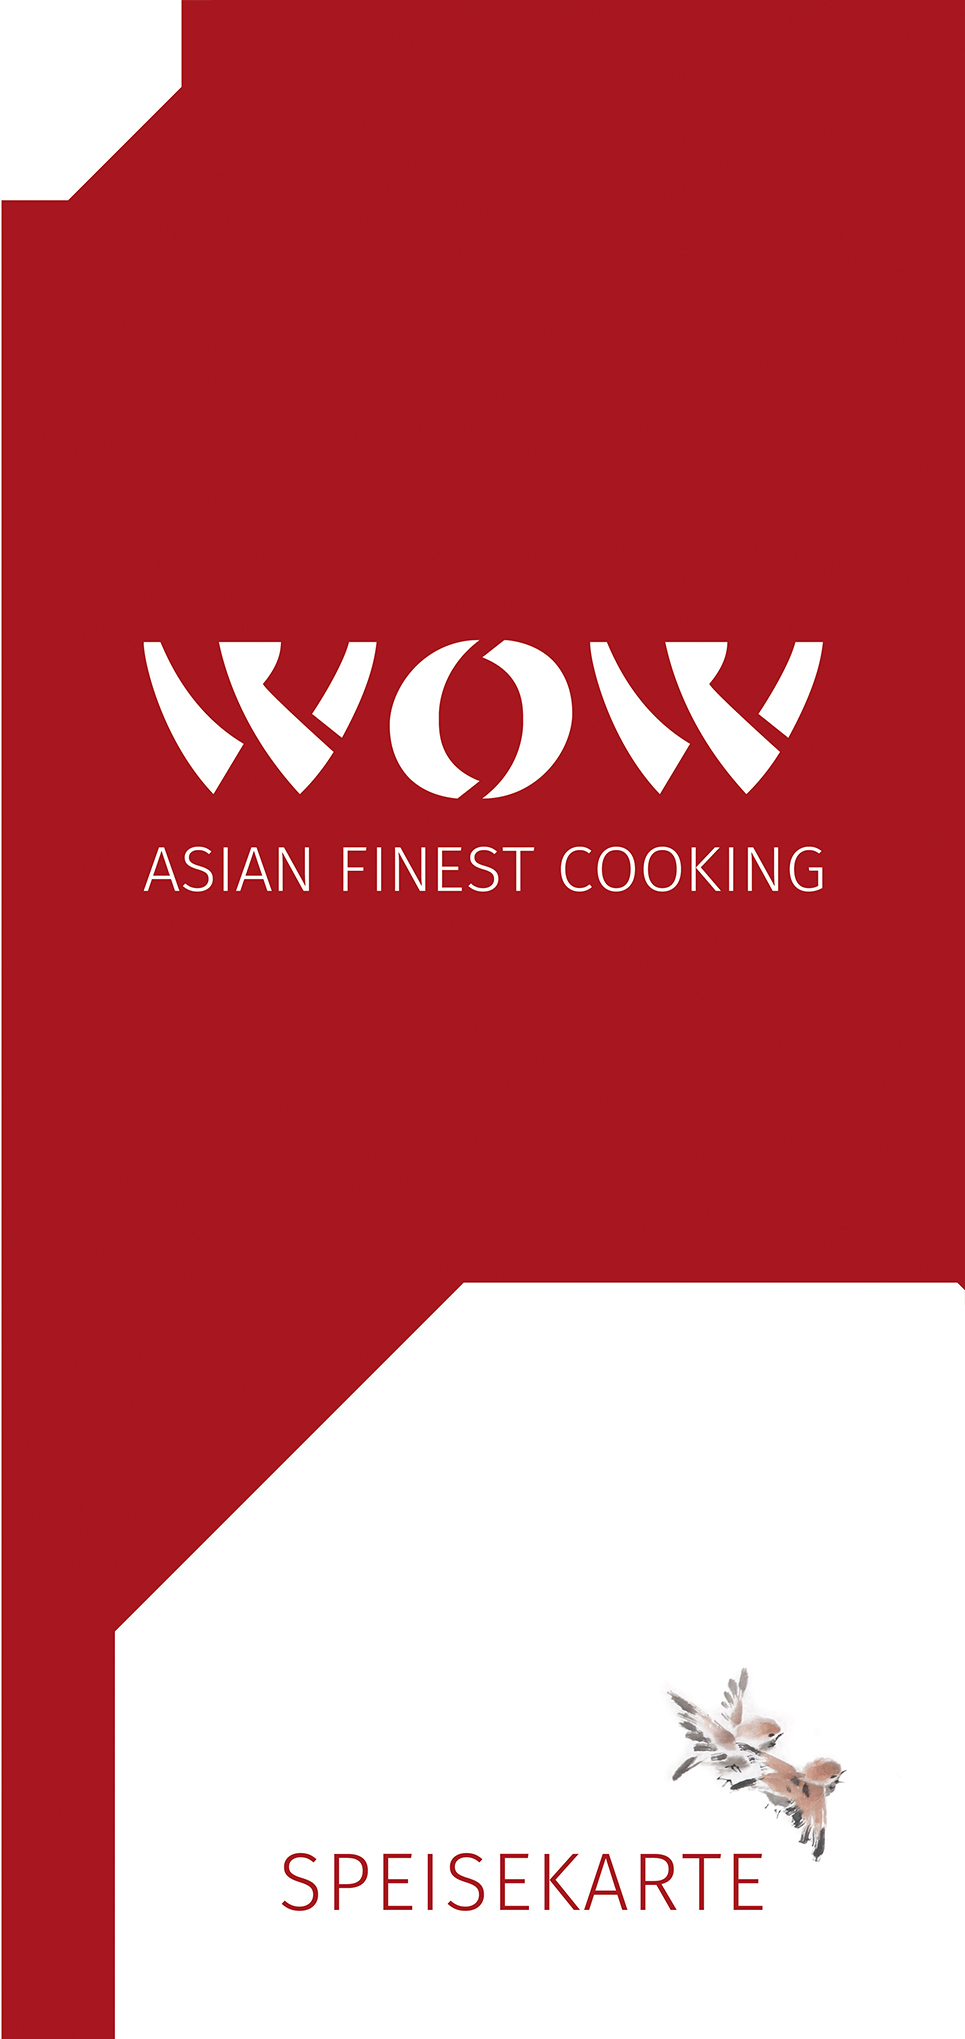 Restaurant WOW-ASIAN FINEST COOKING Speisekarte